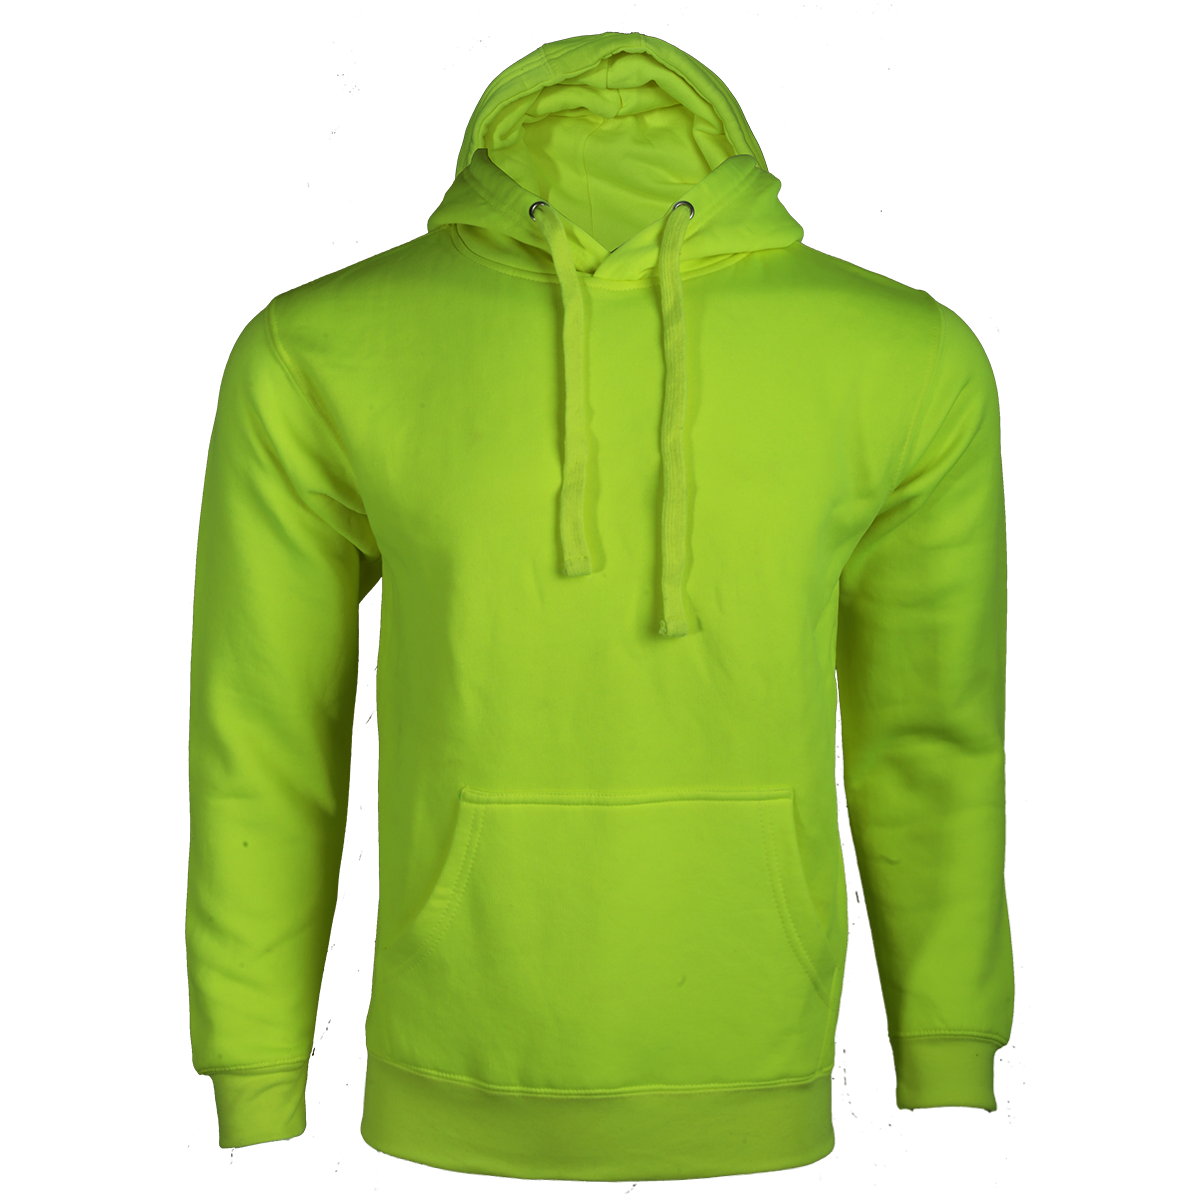 2001 Adults Comfort Hoodie 7.8 Oz - Neon Yellow Color - AF APPARELS(USA)